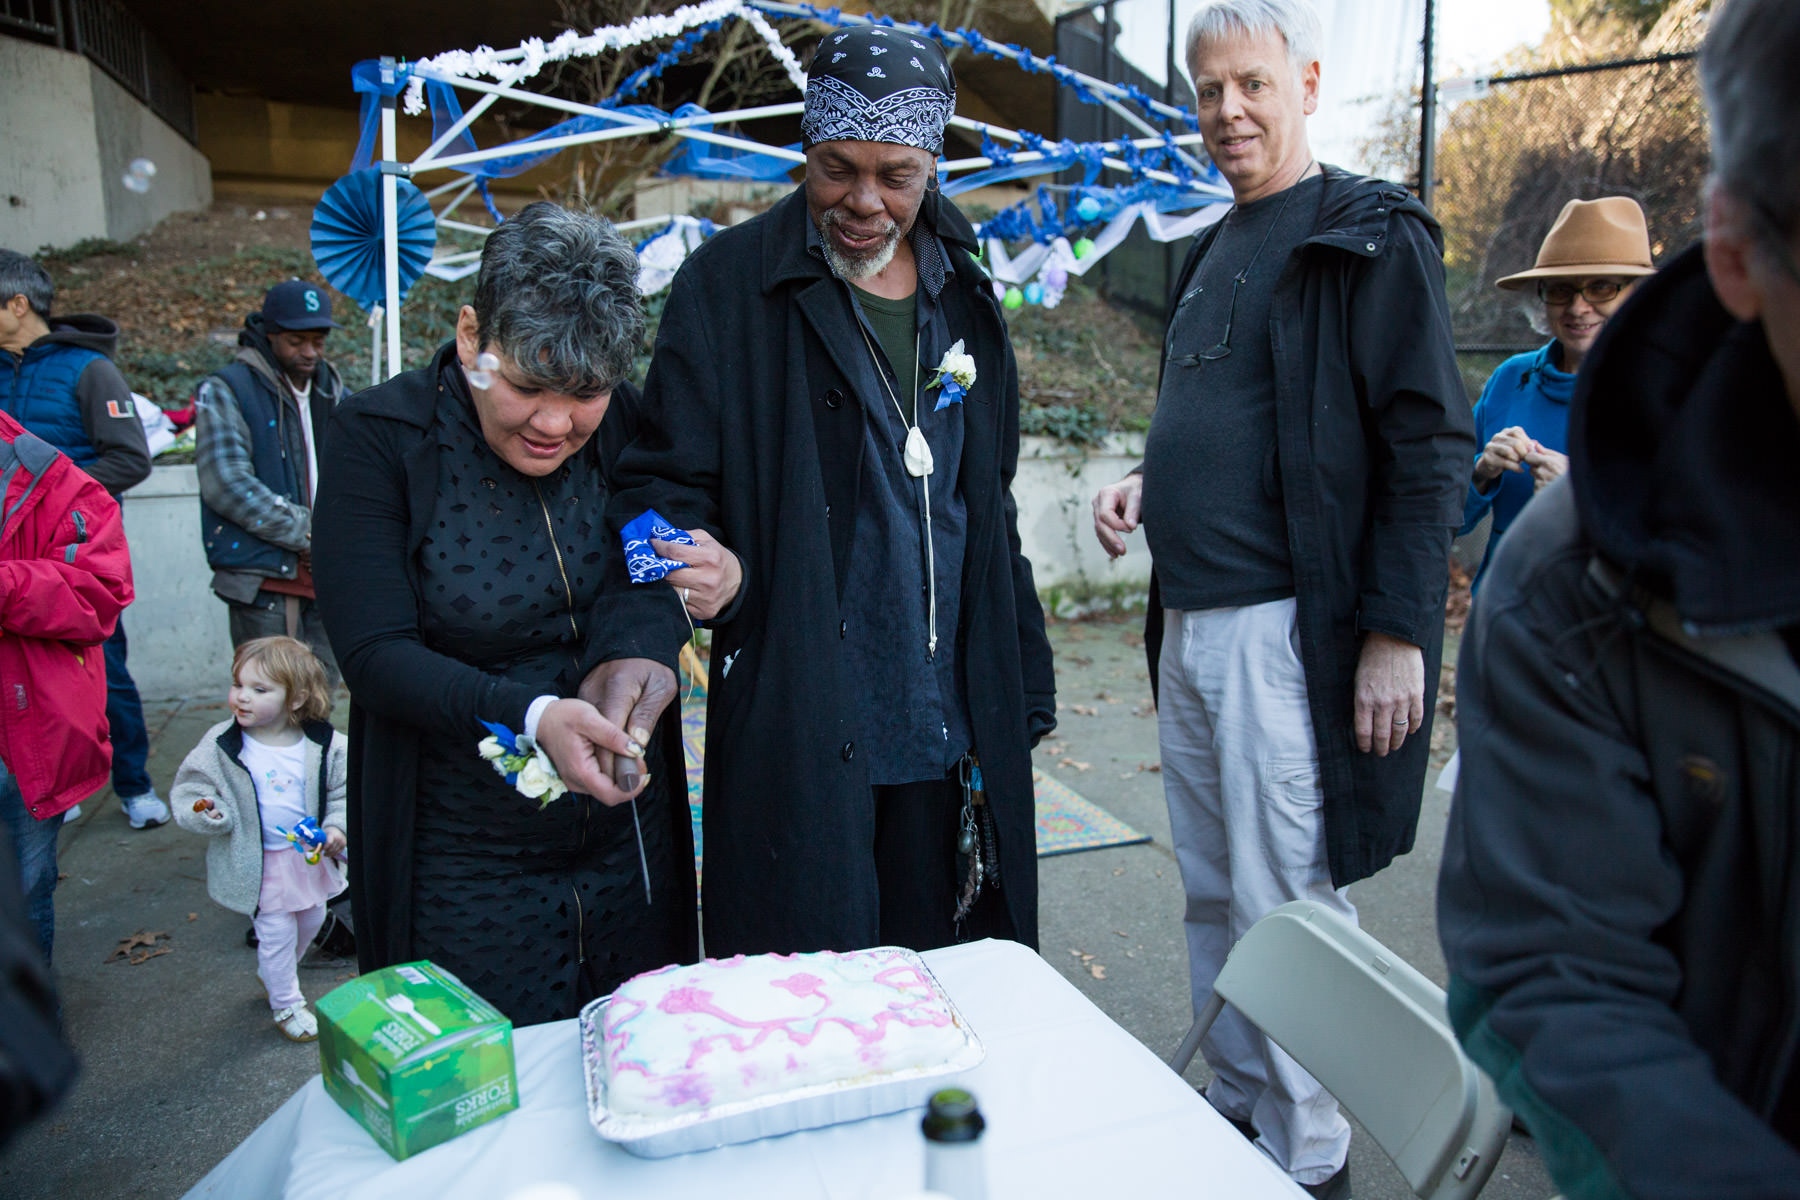 Homeless Vows | NY Times - The couple cut their wedding cake.   For the New...